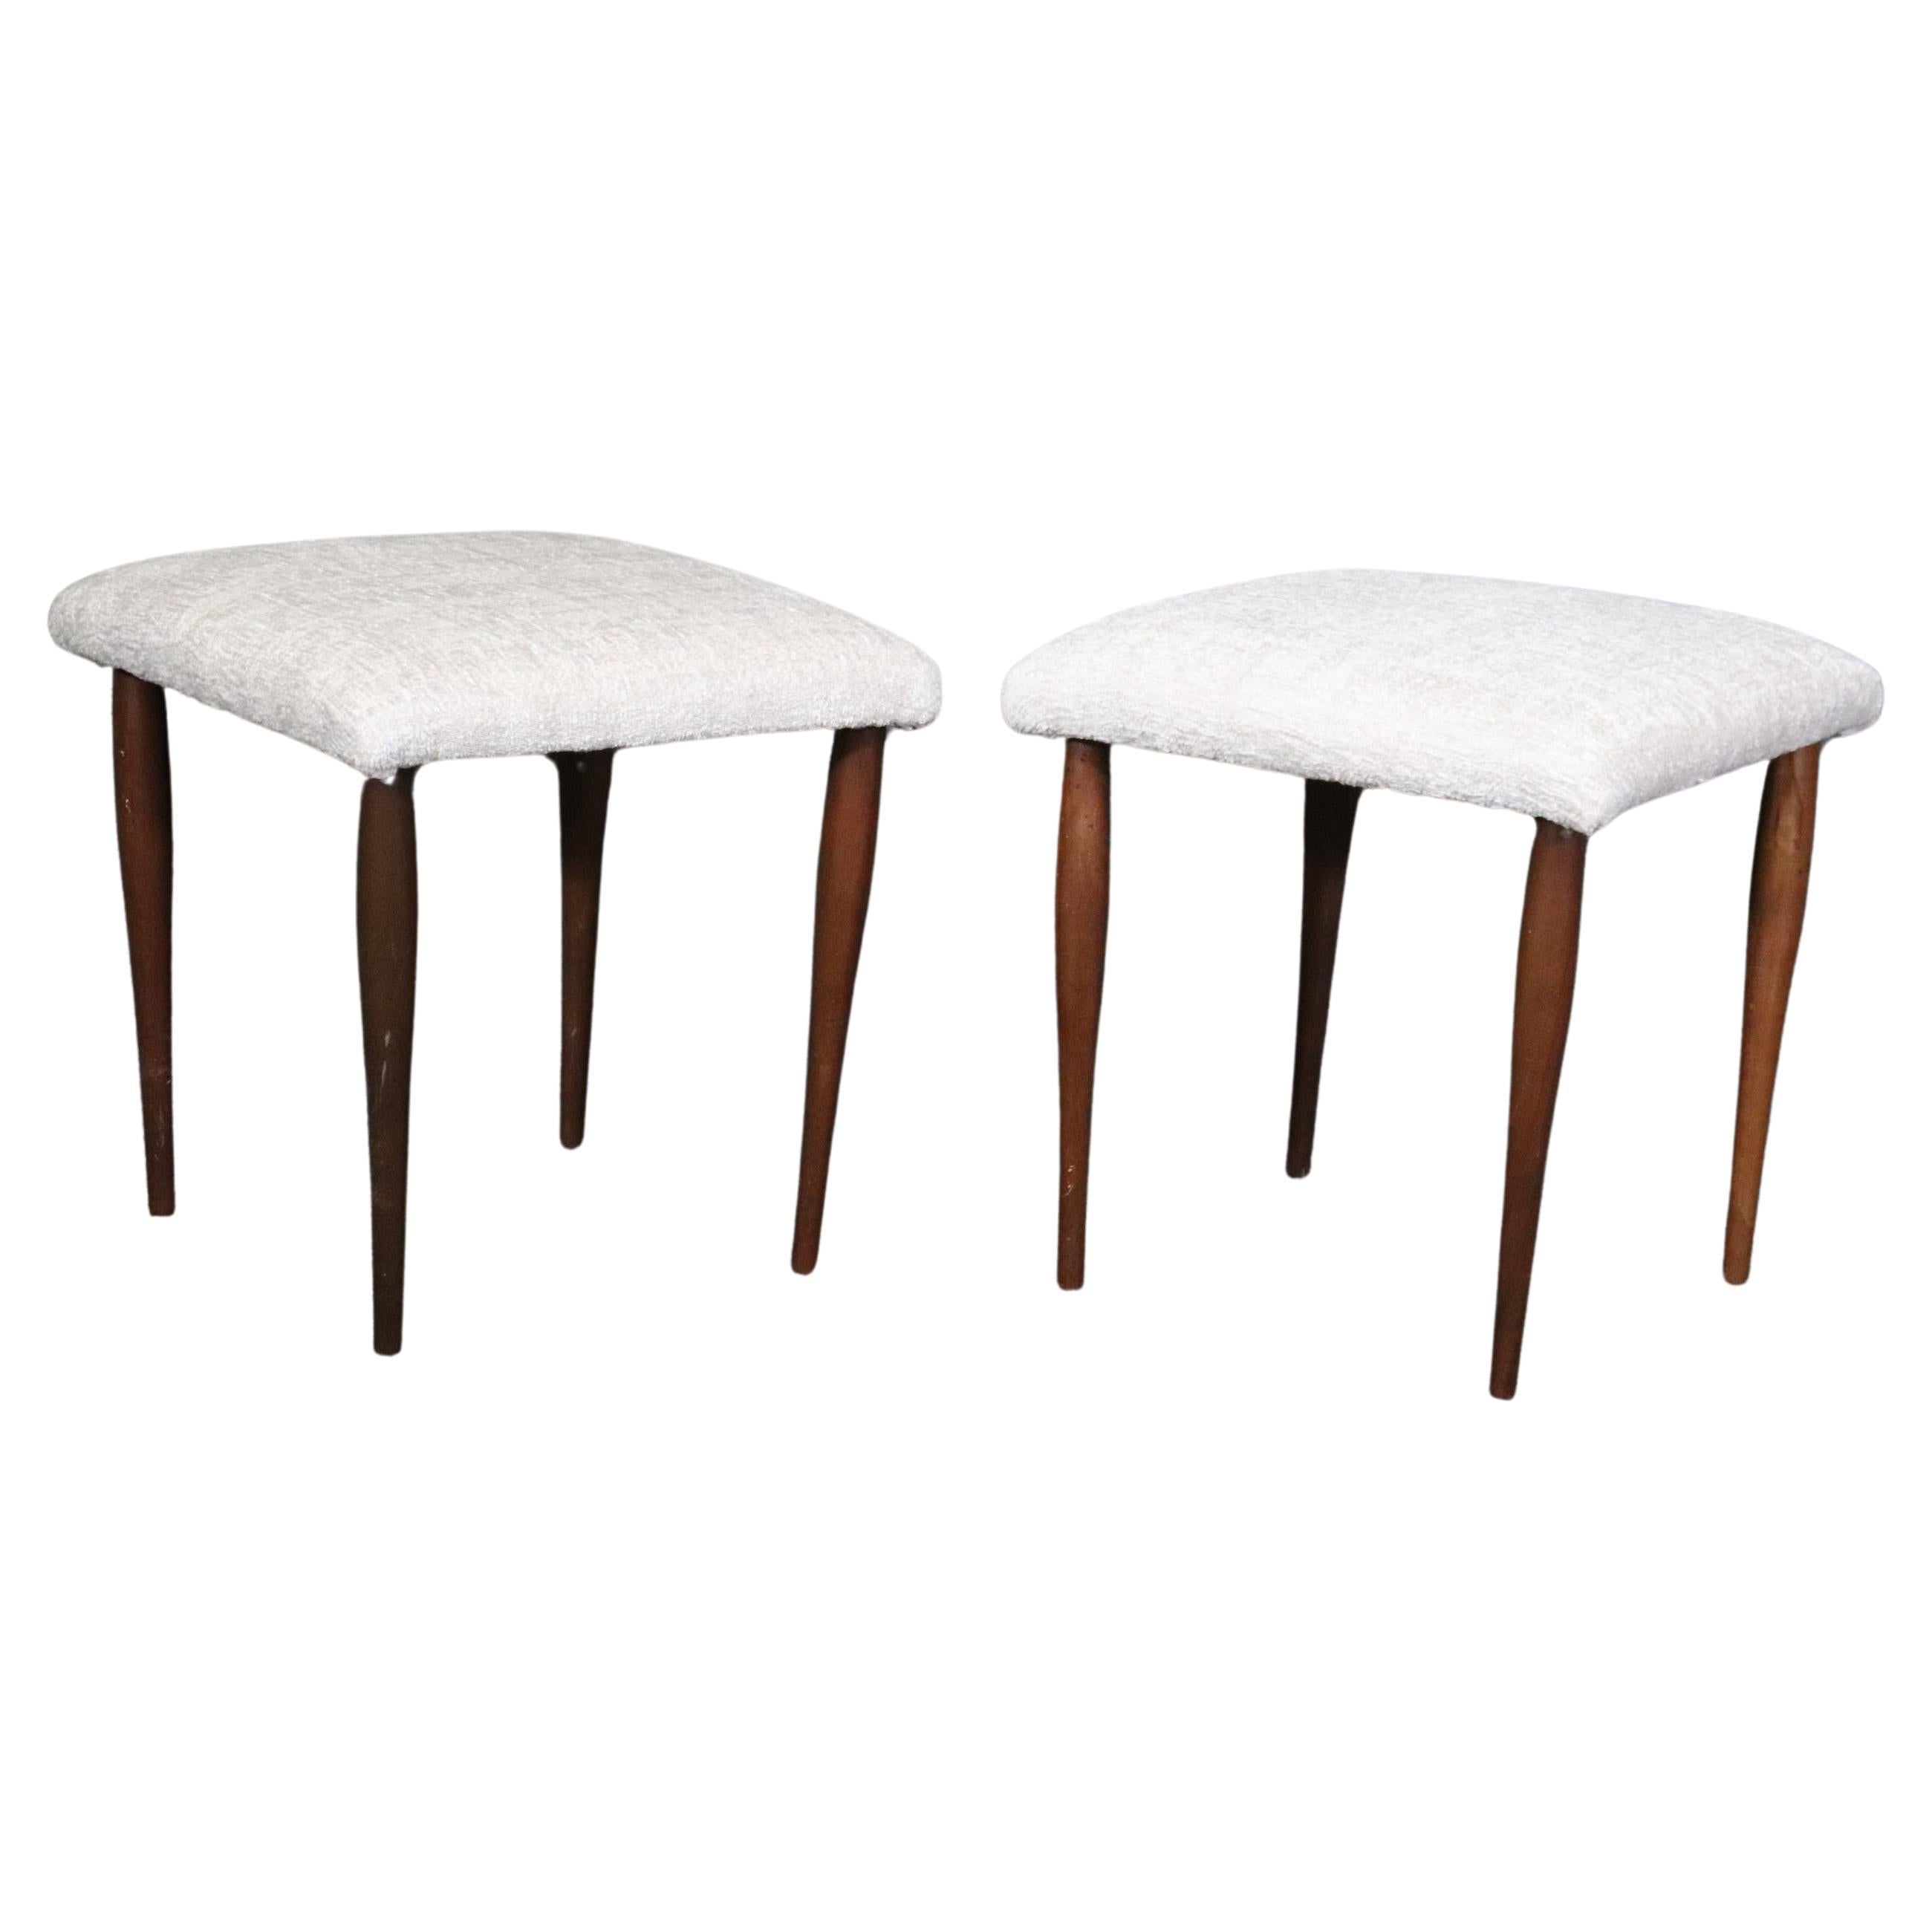 Pair of Mid Century Modern Upholstered Stools Benches